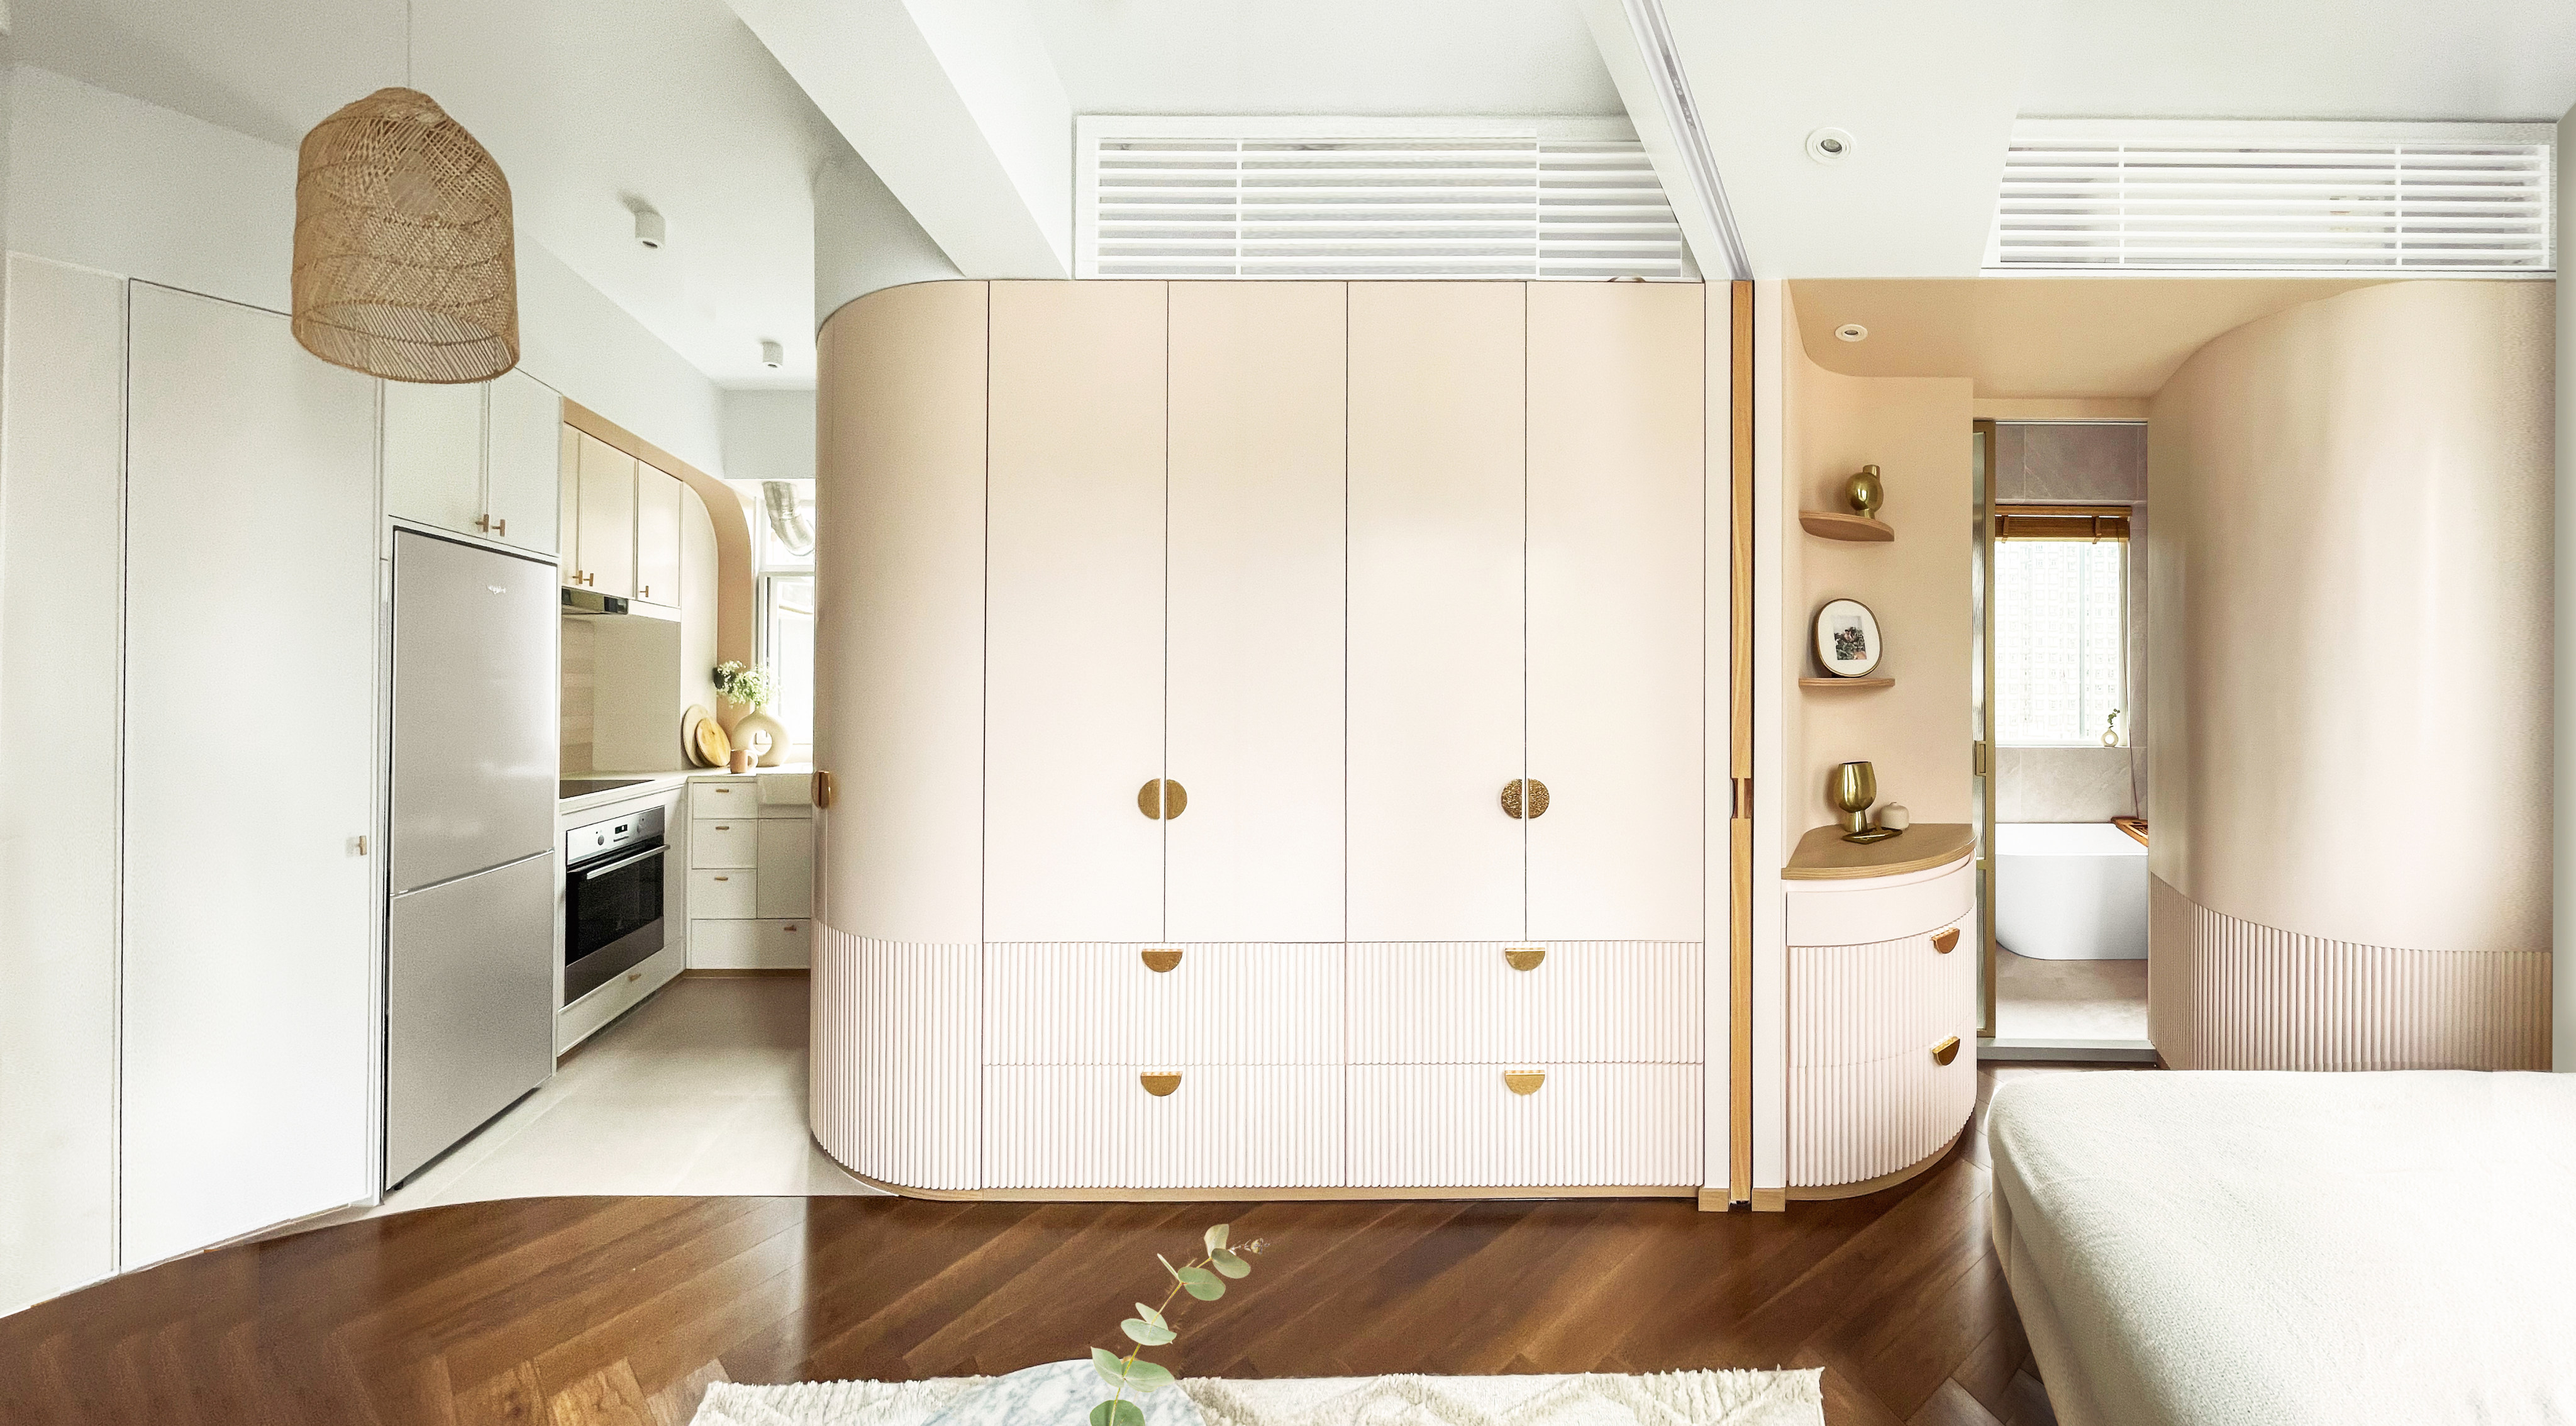 The owner of a Hong Kong micro-apartment wanted all the trappings of a bigger home – including a tub and a built-in oven. A young design duo helped make it happen. Photo: Craft of Both